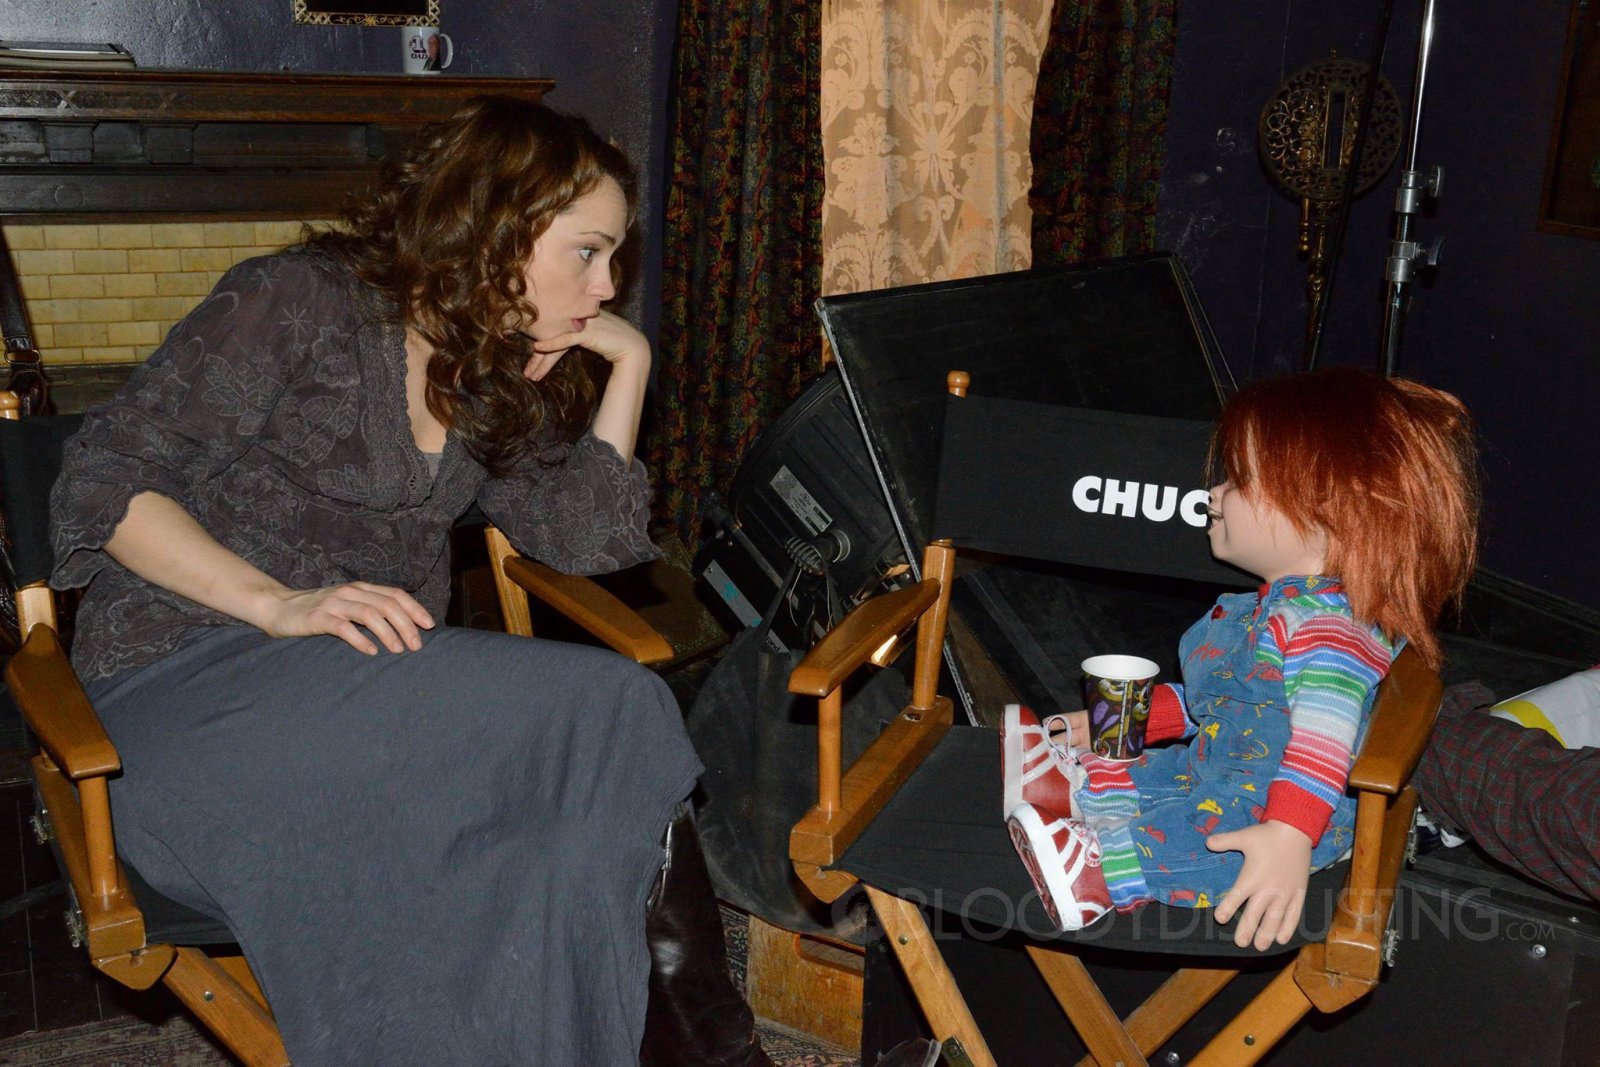 curse-of-chucky-watermarked (1600x1067, 296 kБ)